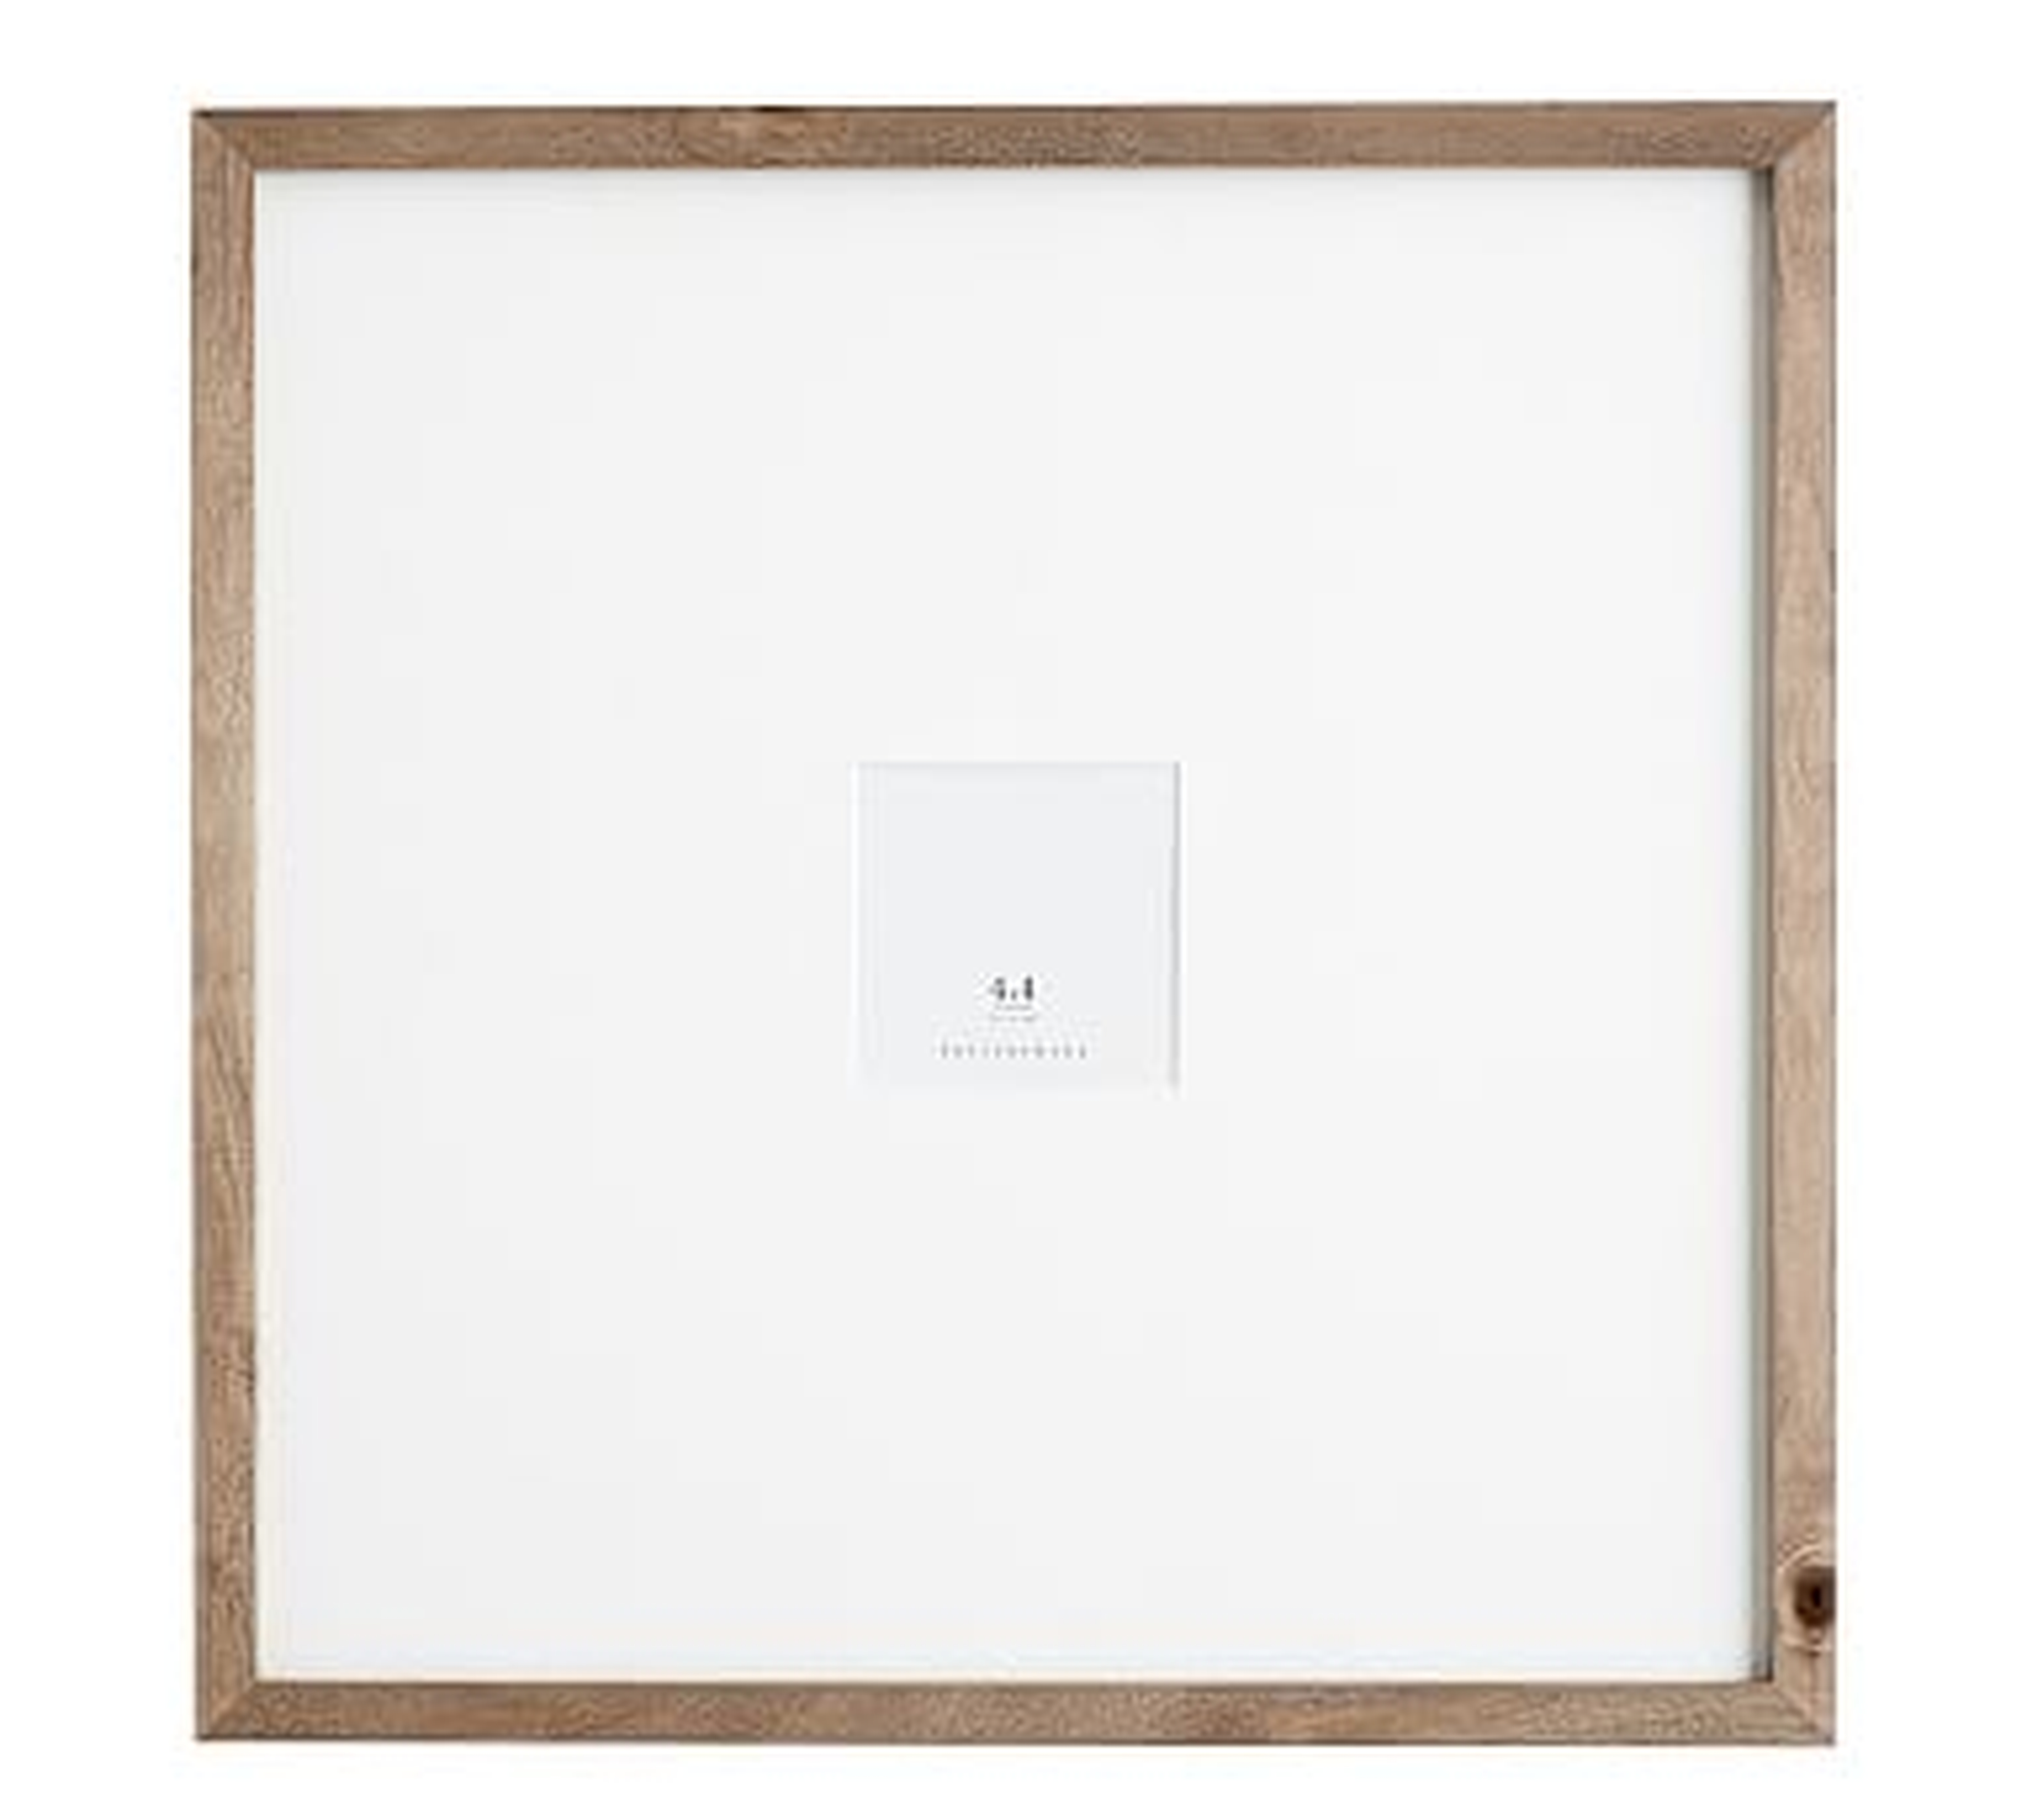 Wood Gallery Oversized Frame, Gray, 18"x18" - Pottery Barn